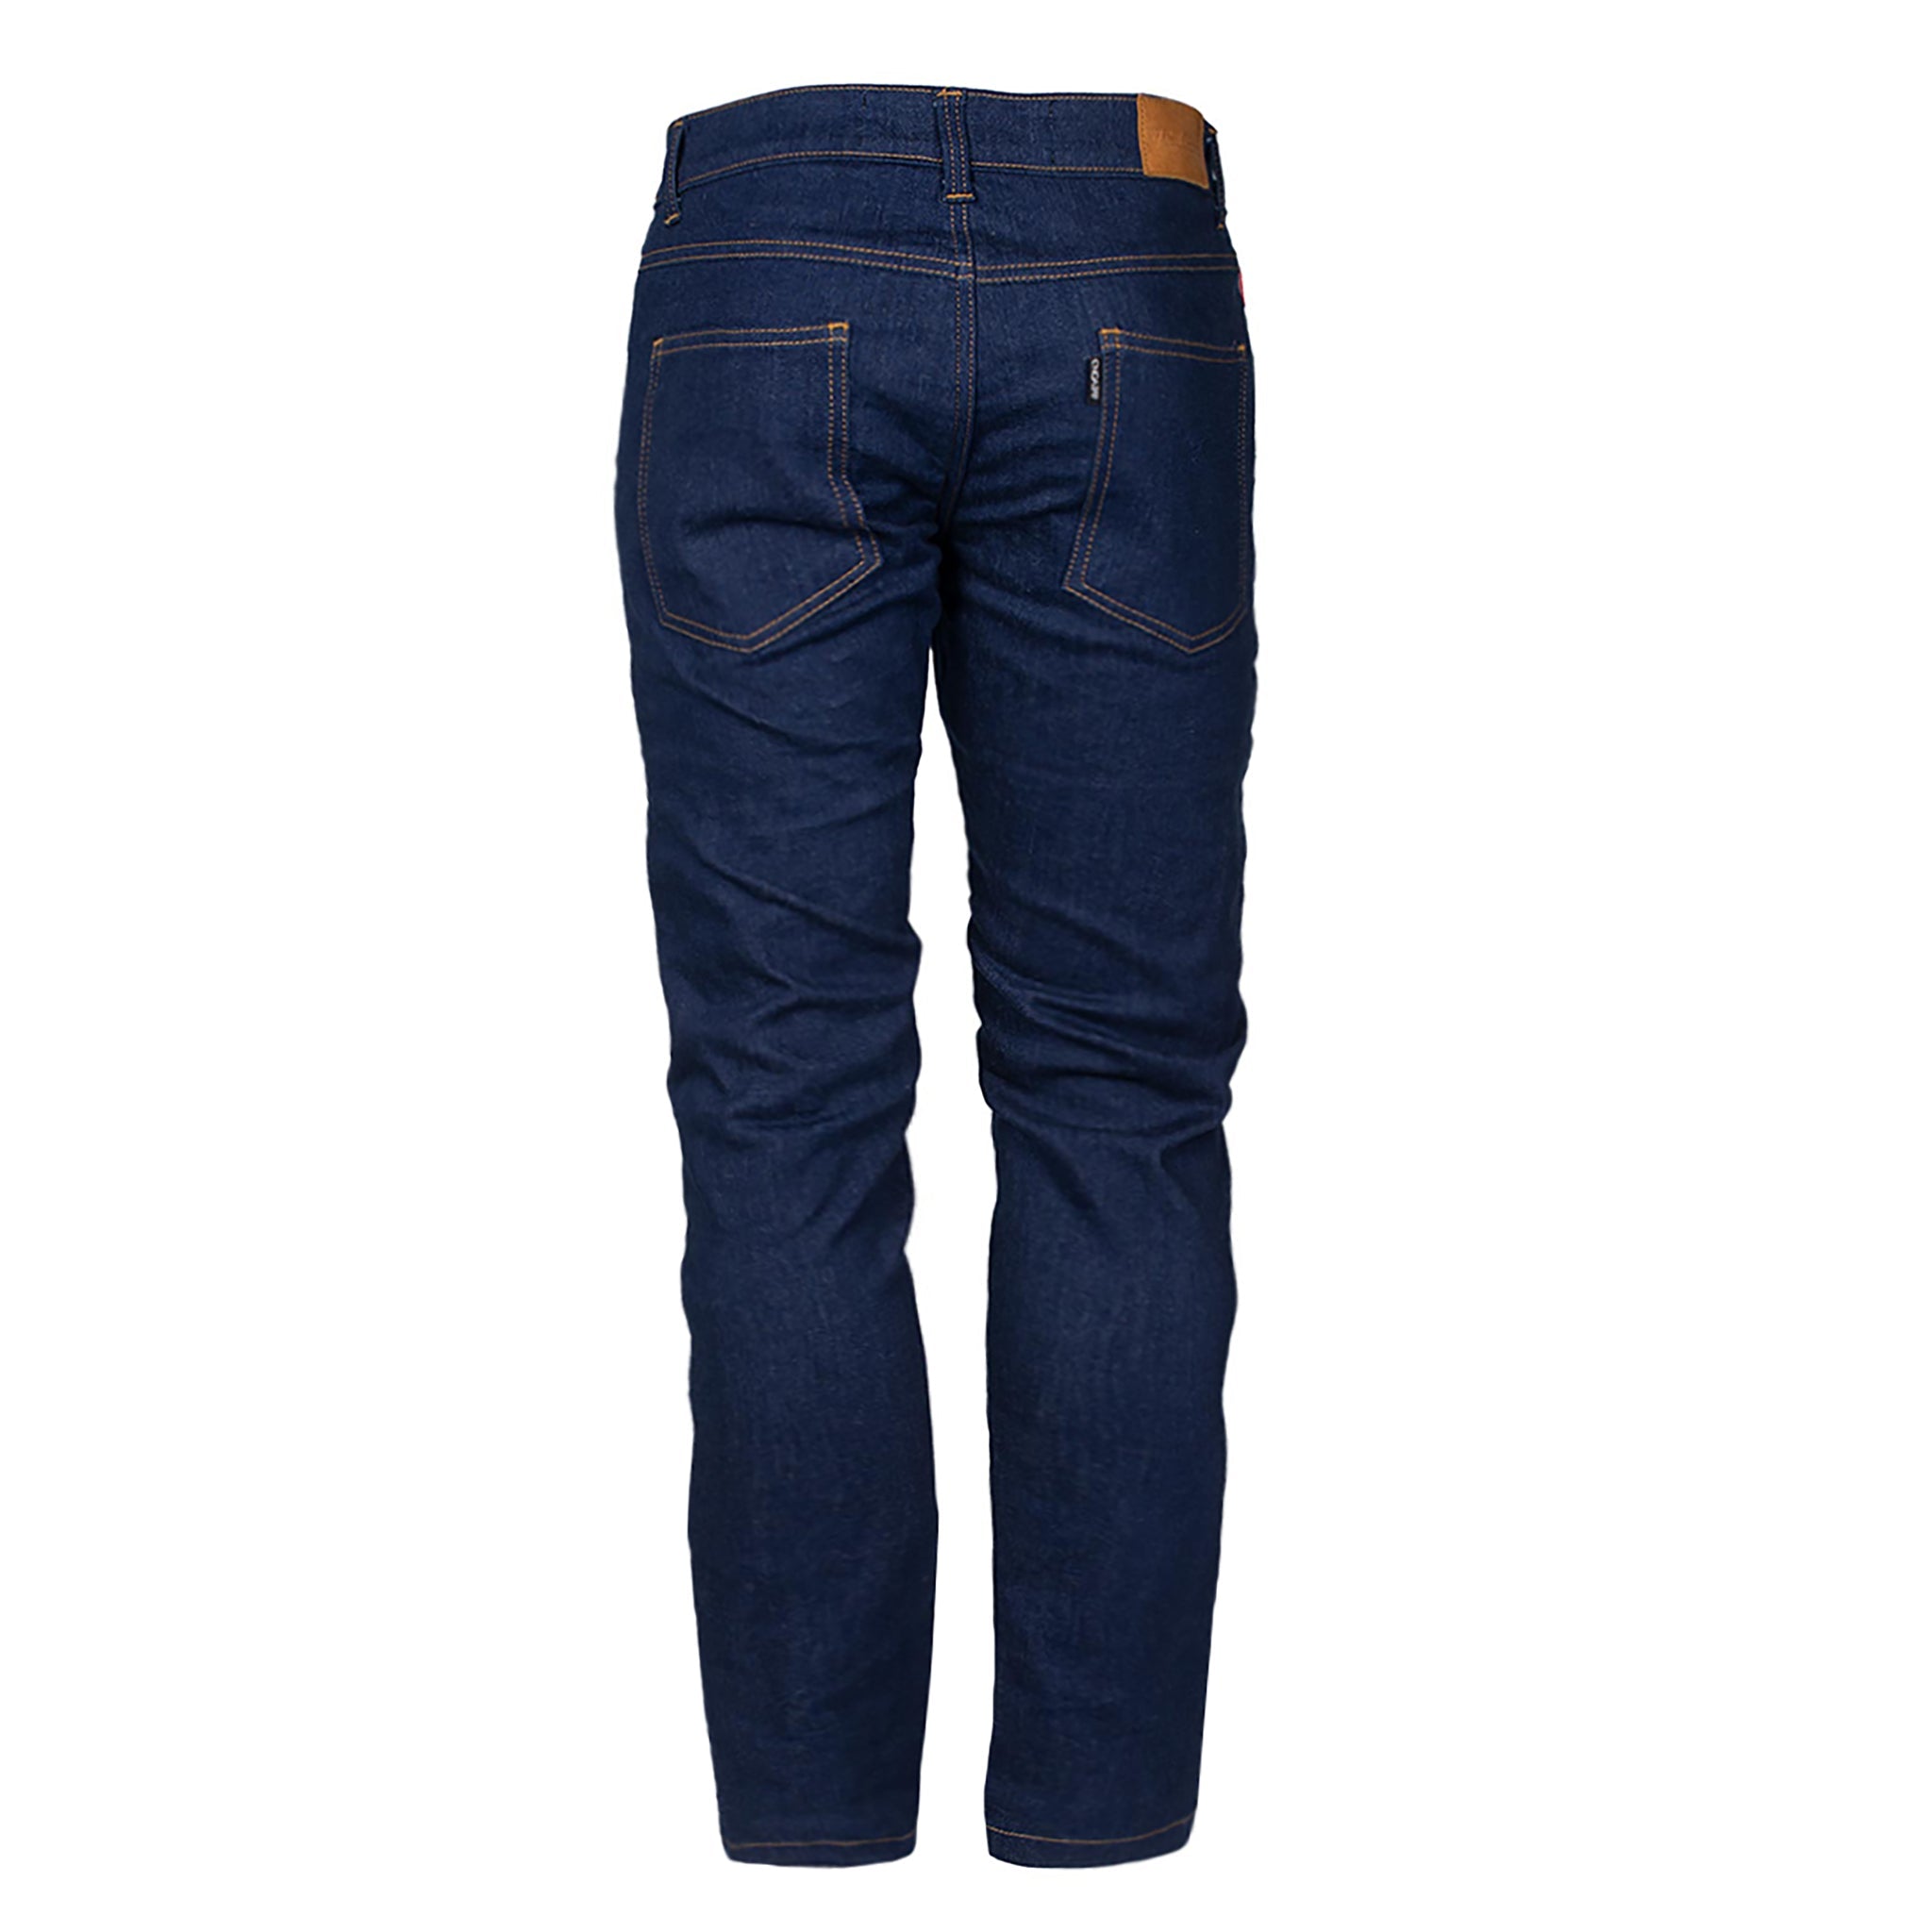 SALE Relaxed Fit Protective Jeans - Blue with Pads